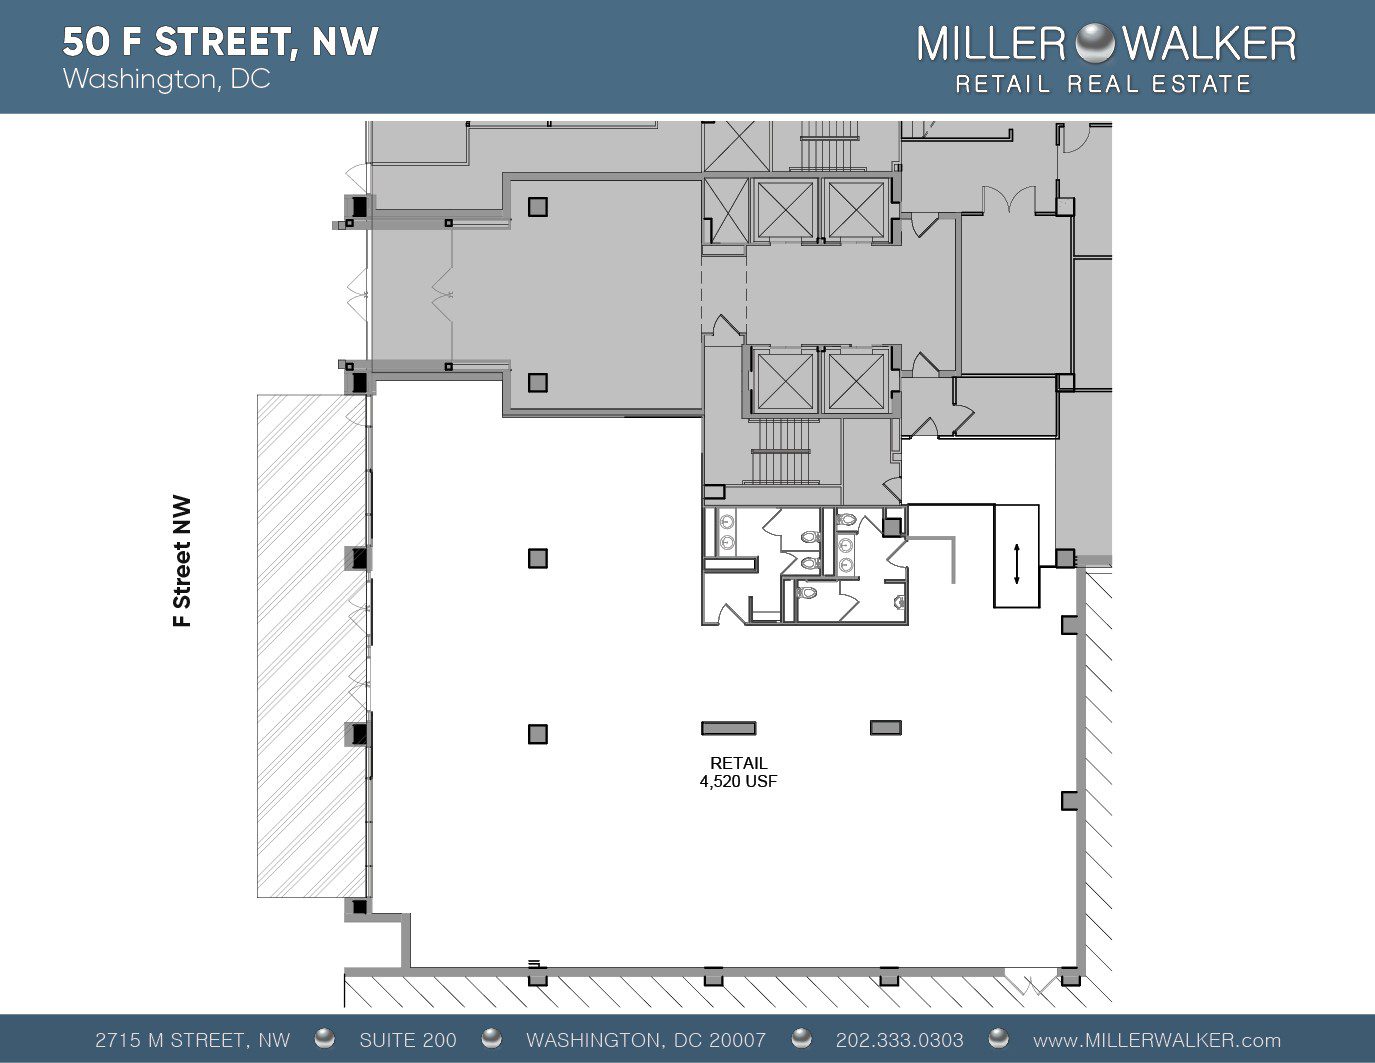 50 F Street nw capital hill retail space floor plans